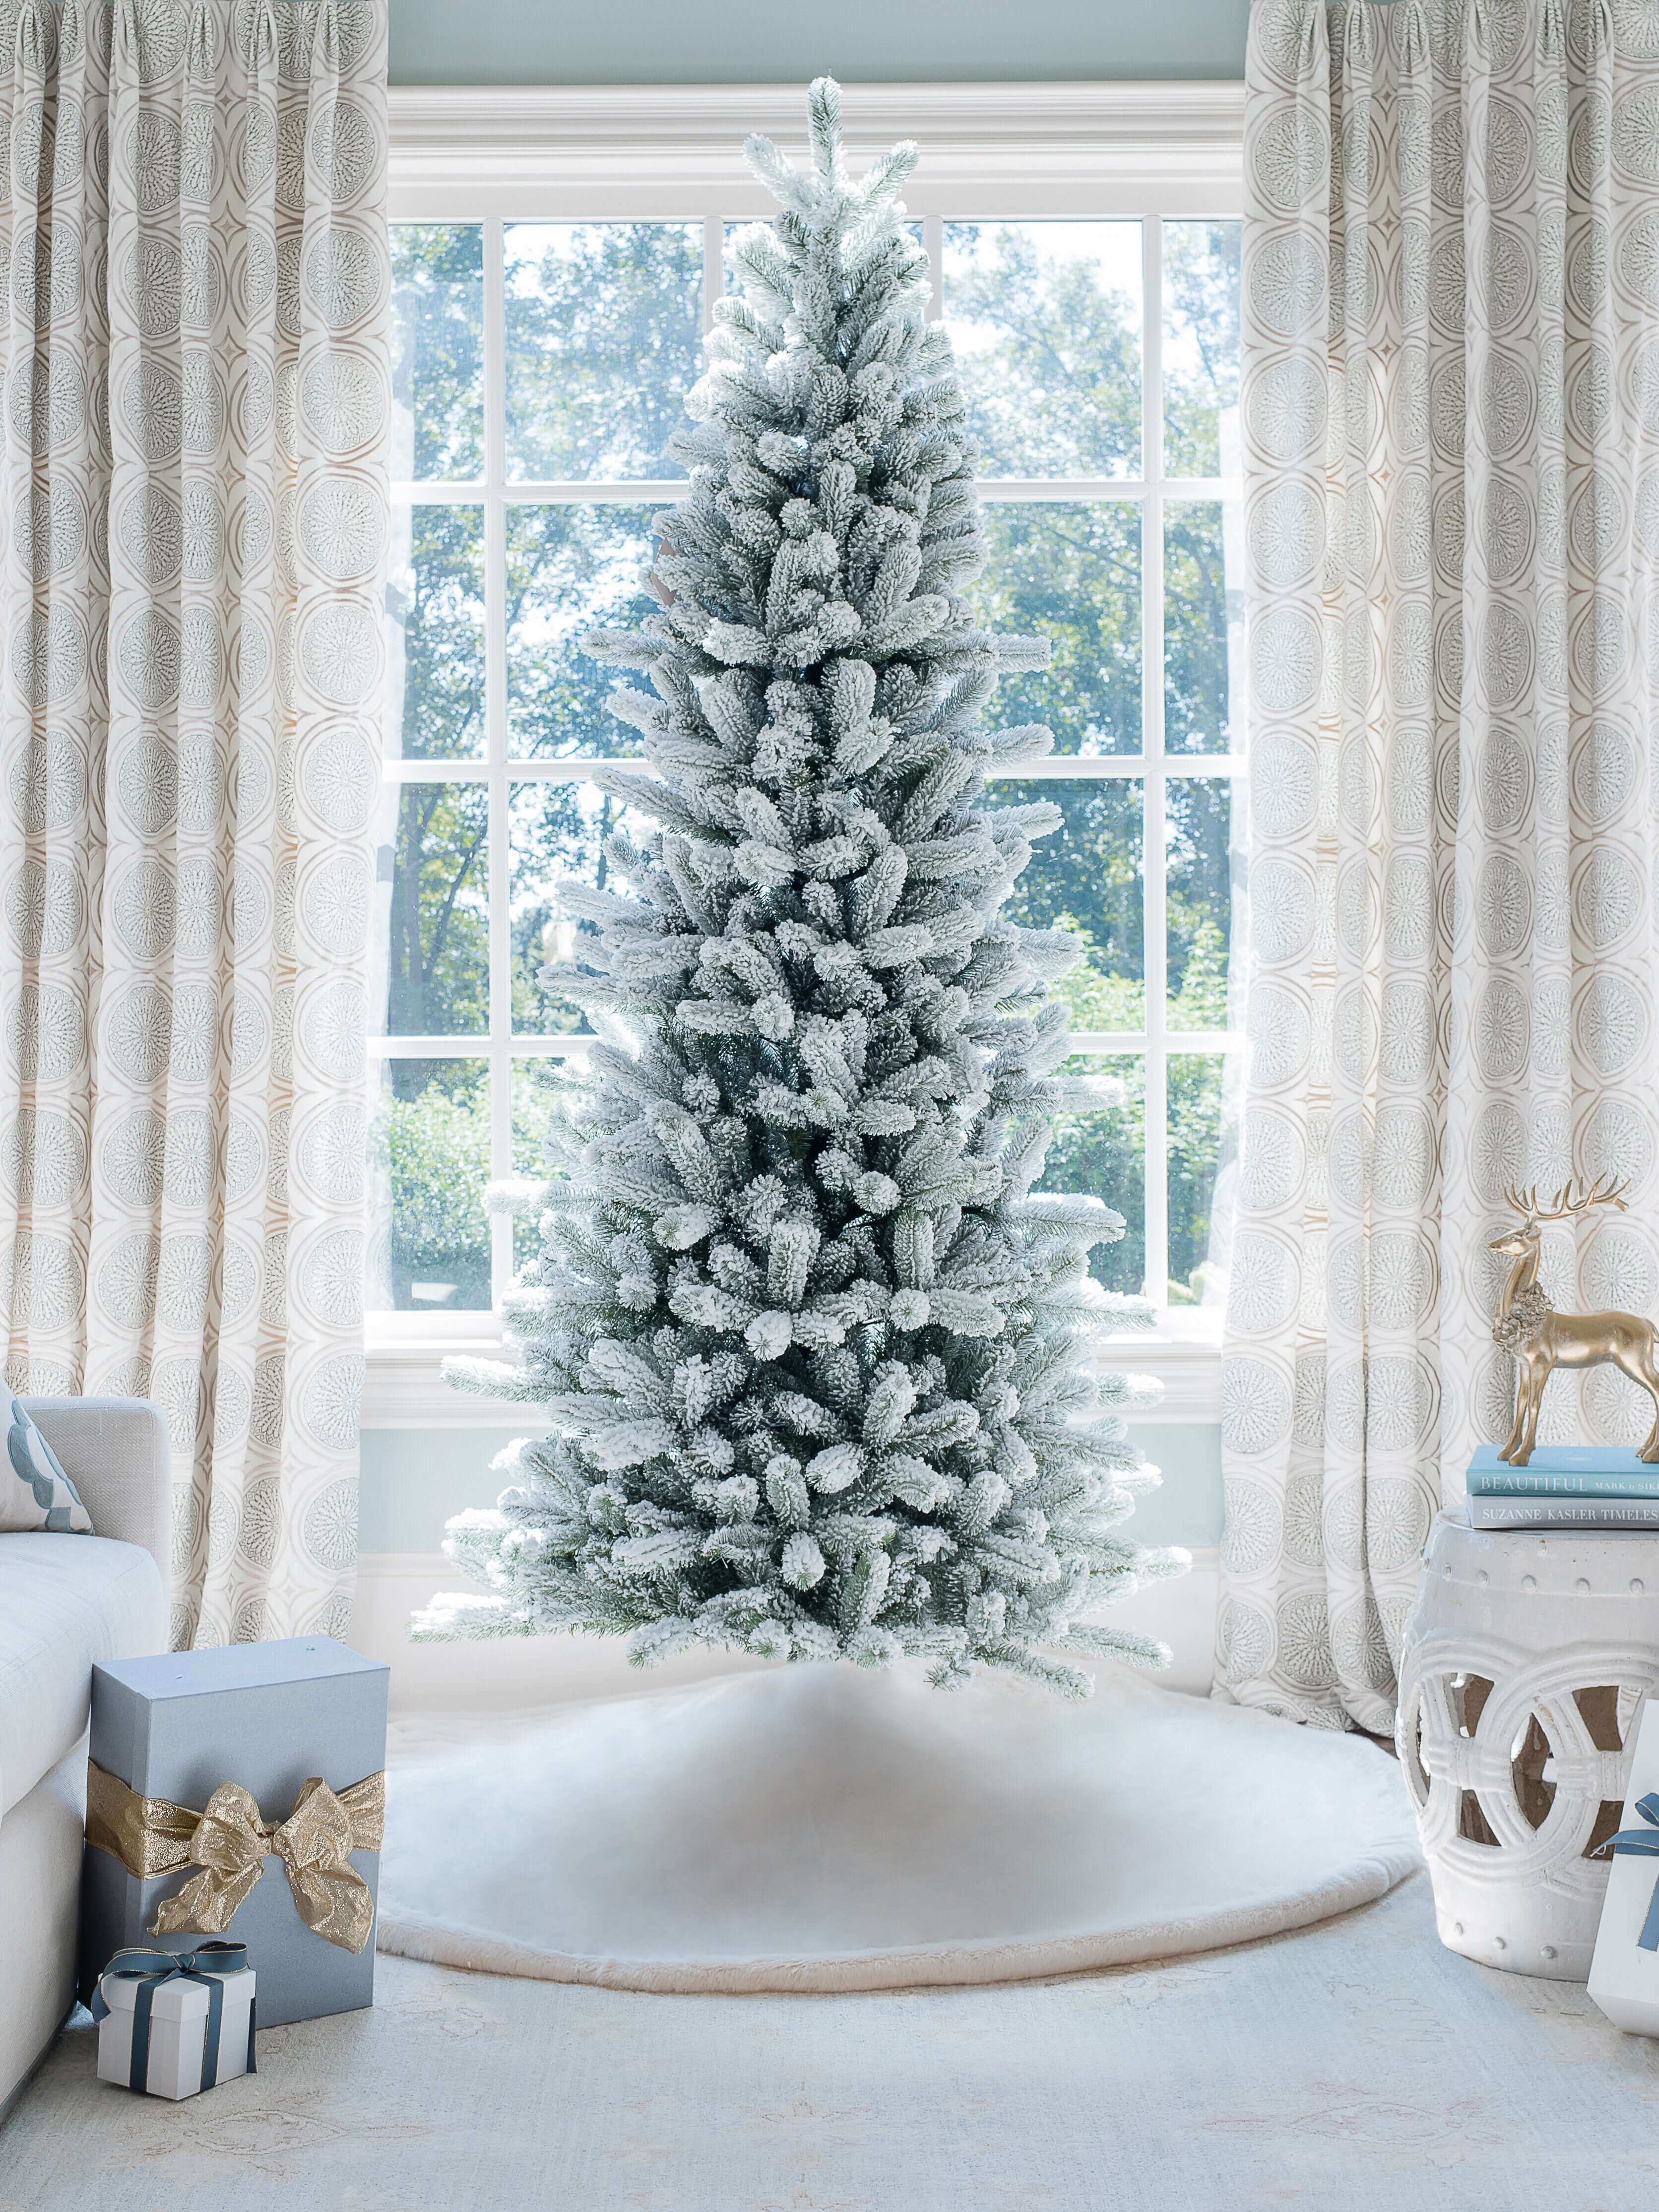 How to make an artificial Christmas tree less wide? Has anyone